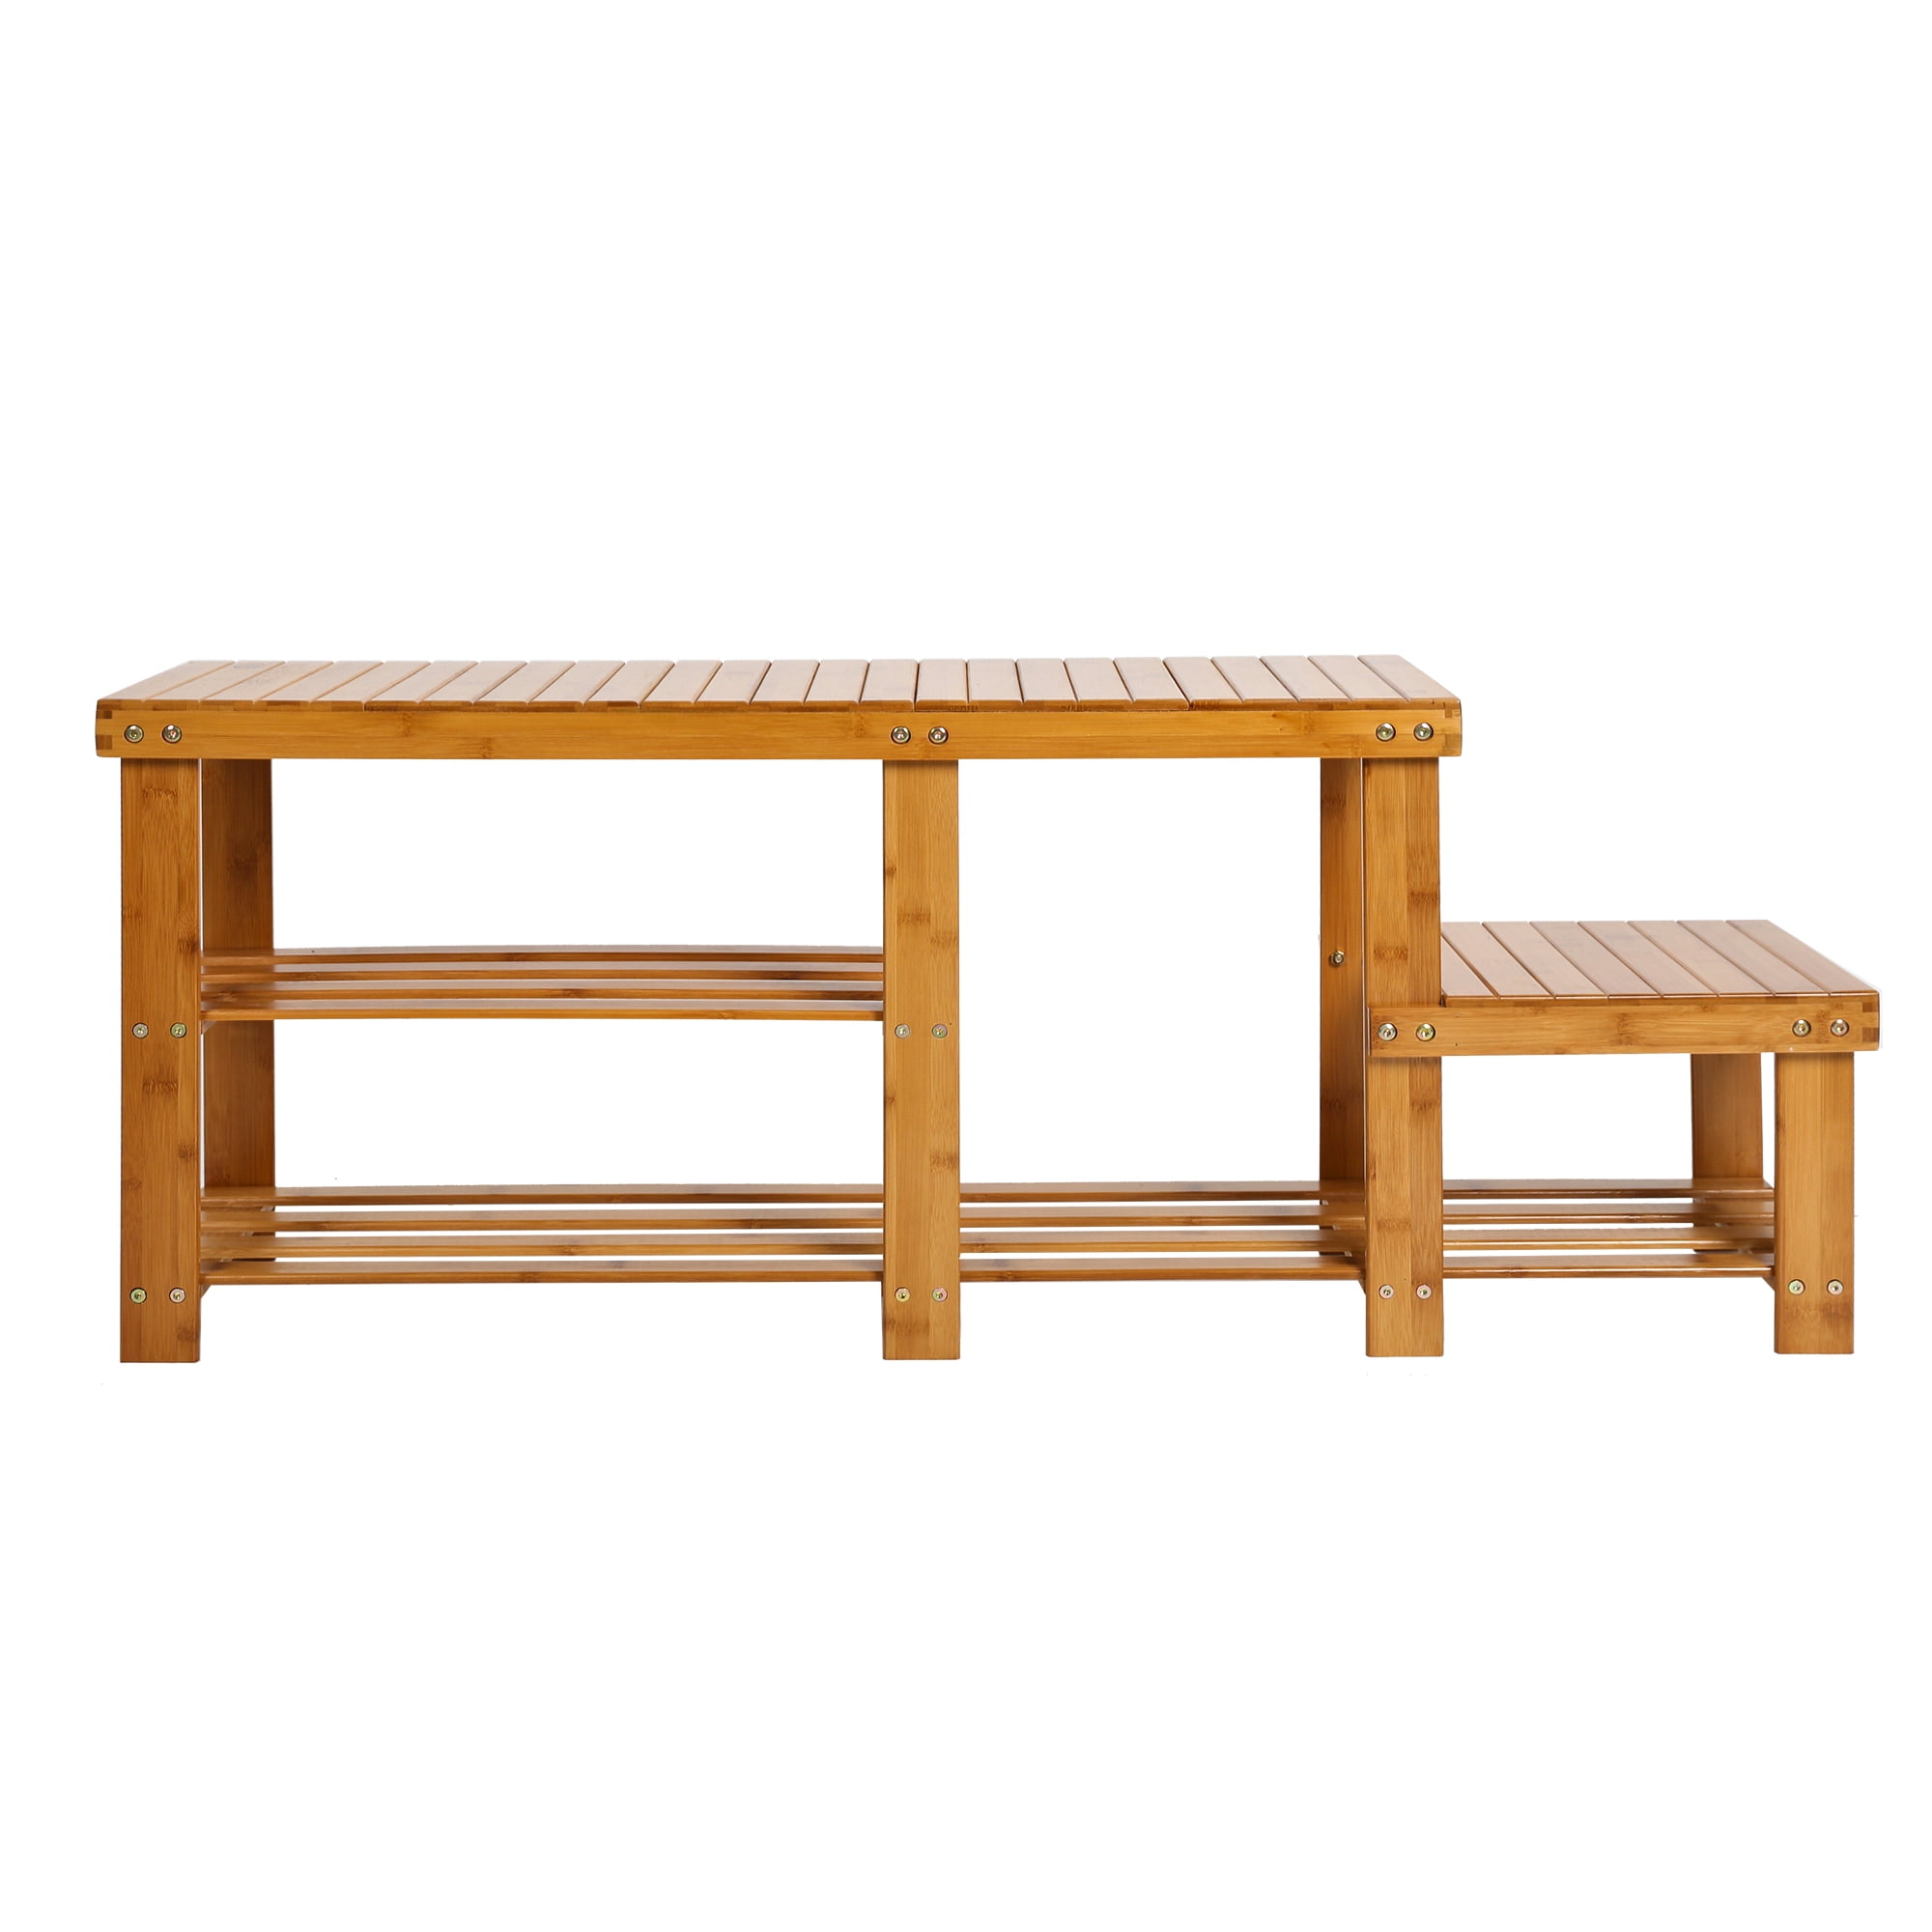 Bench Seat Perfect for Entryway Hallway or Bedroom Mudroom 2 Tier Organizing Rack Hallway or Bedroom Closets 23.5x11.5x18 23.5x11.5x18 Royal Brands Bamboo Shoe Rack Bench